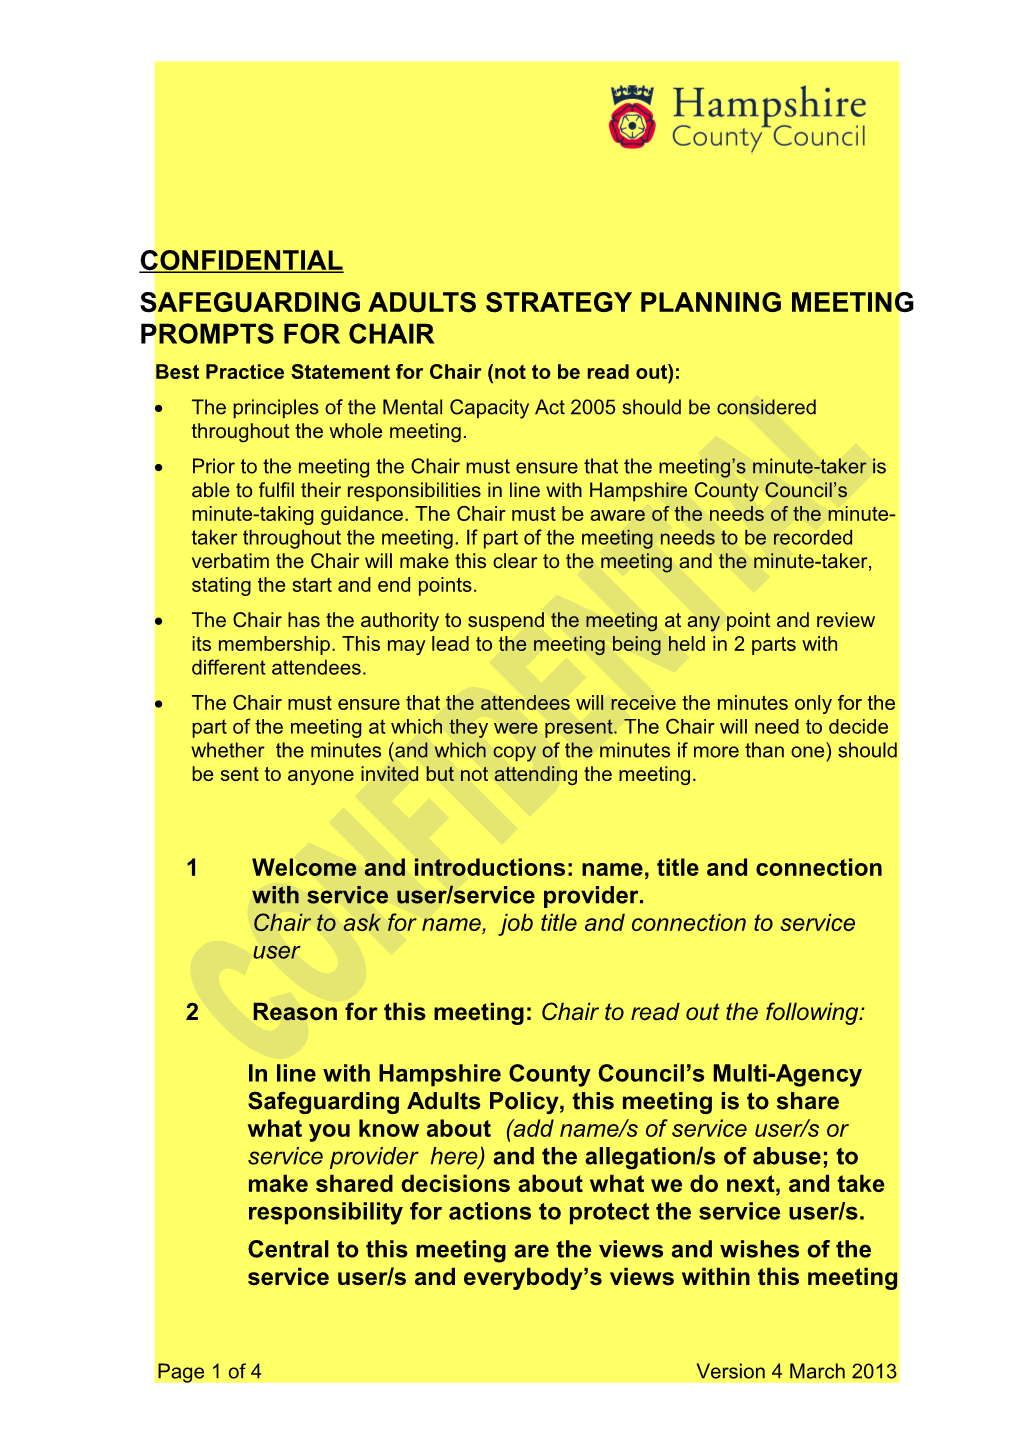 Safeguarding Adults Strategy Planningmeeting Prompts for Chair